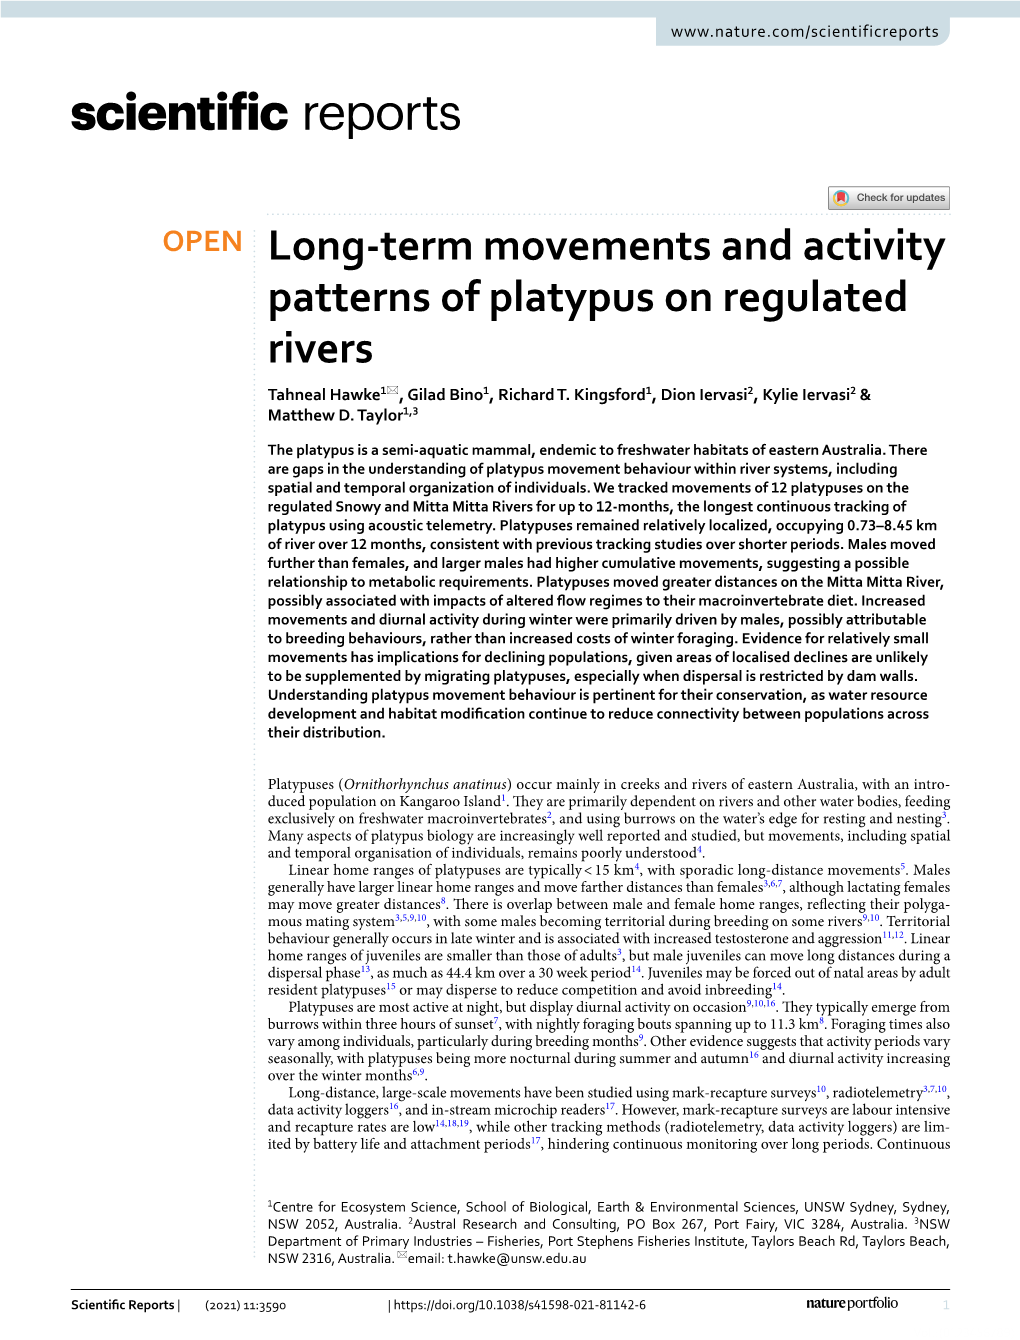 Long-Term Movements and Activity Patterns of Platypus on Regulated